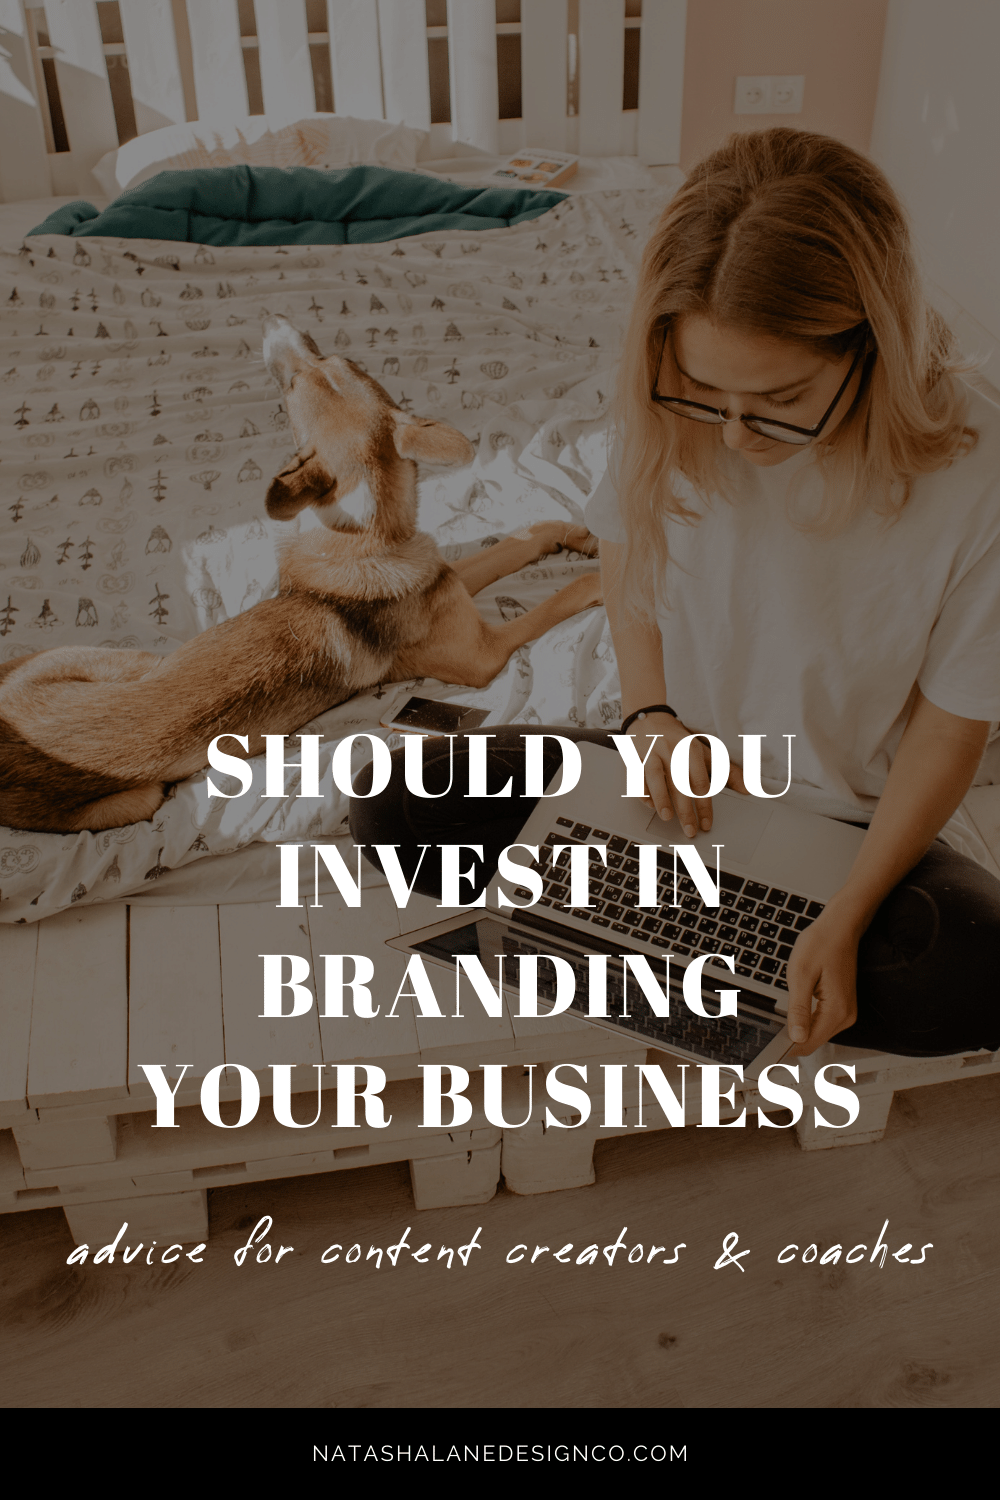 Should you invest in branding your business?